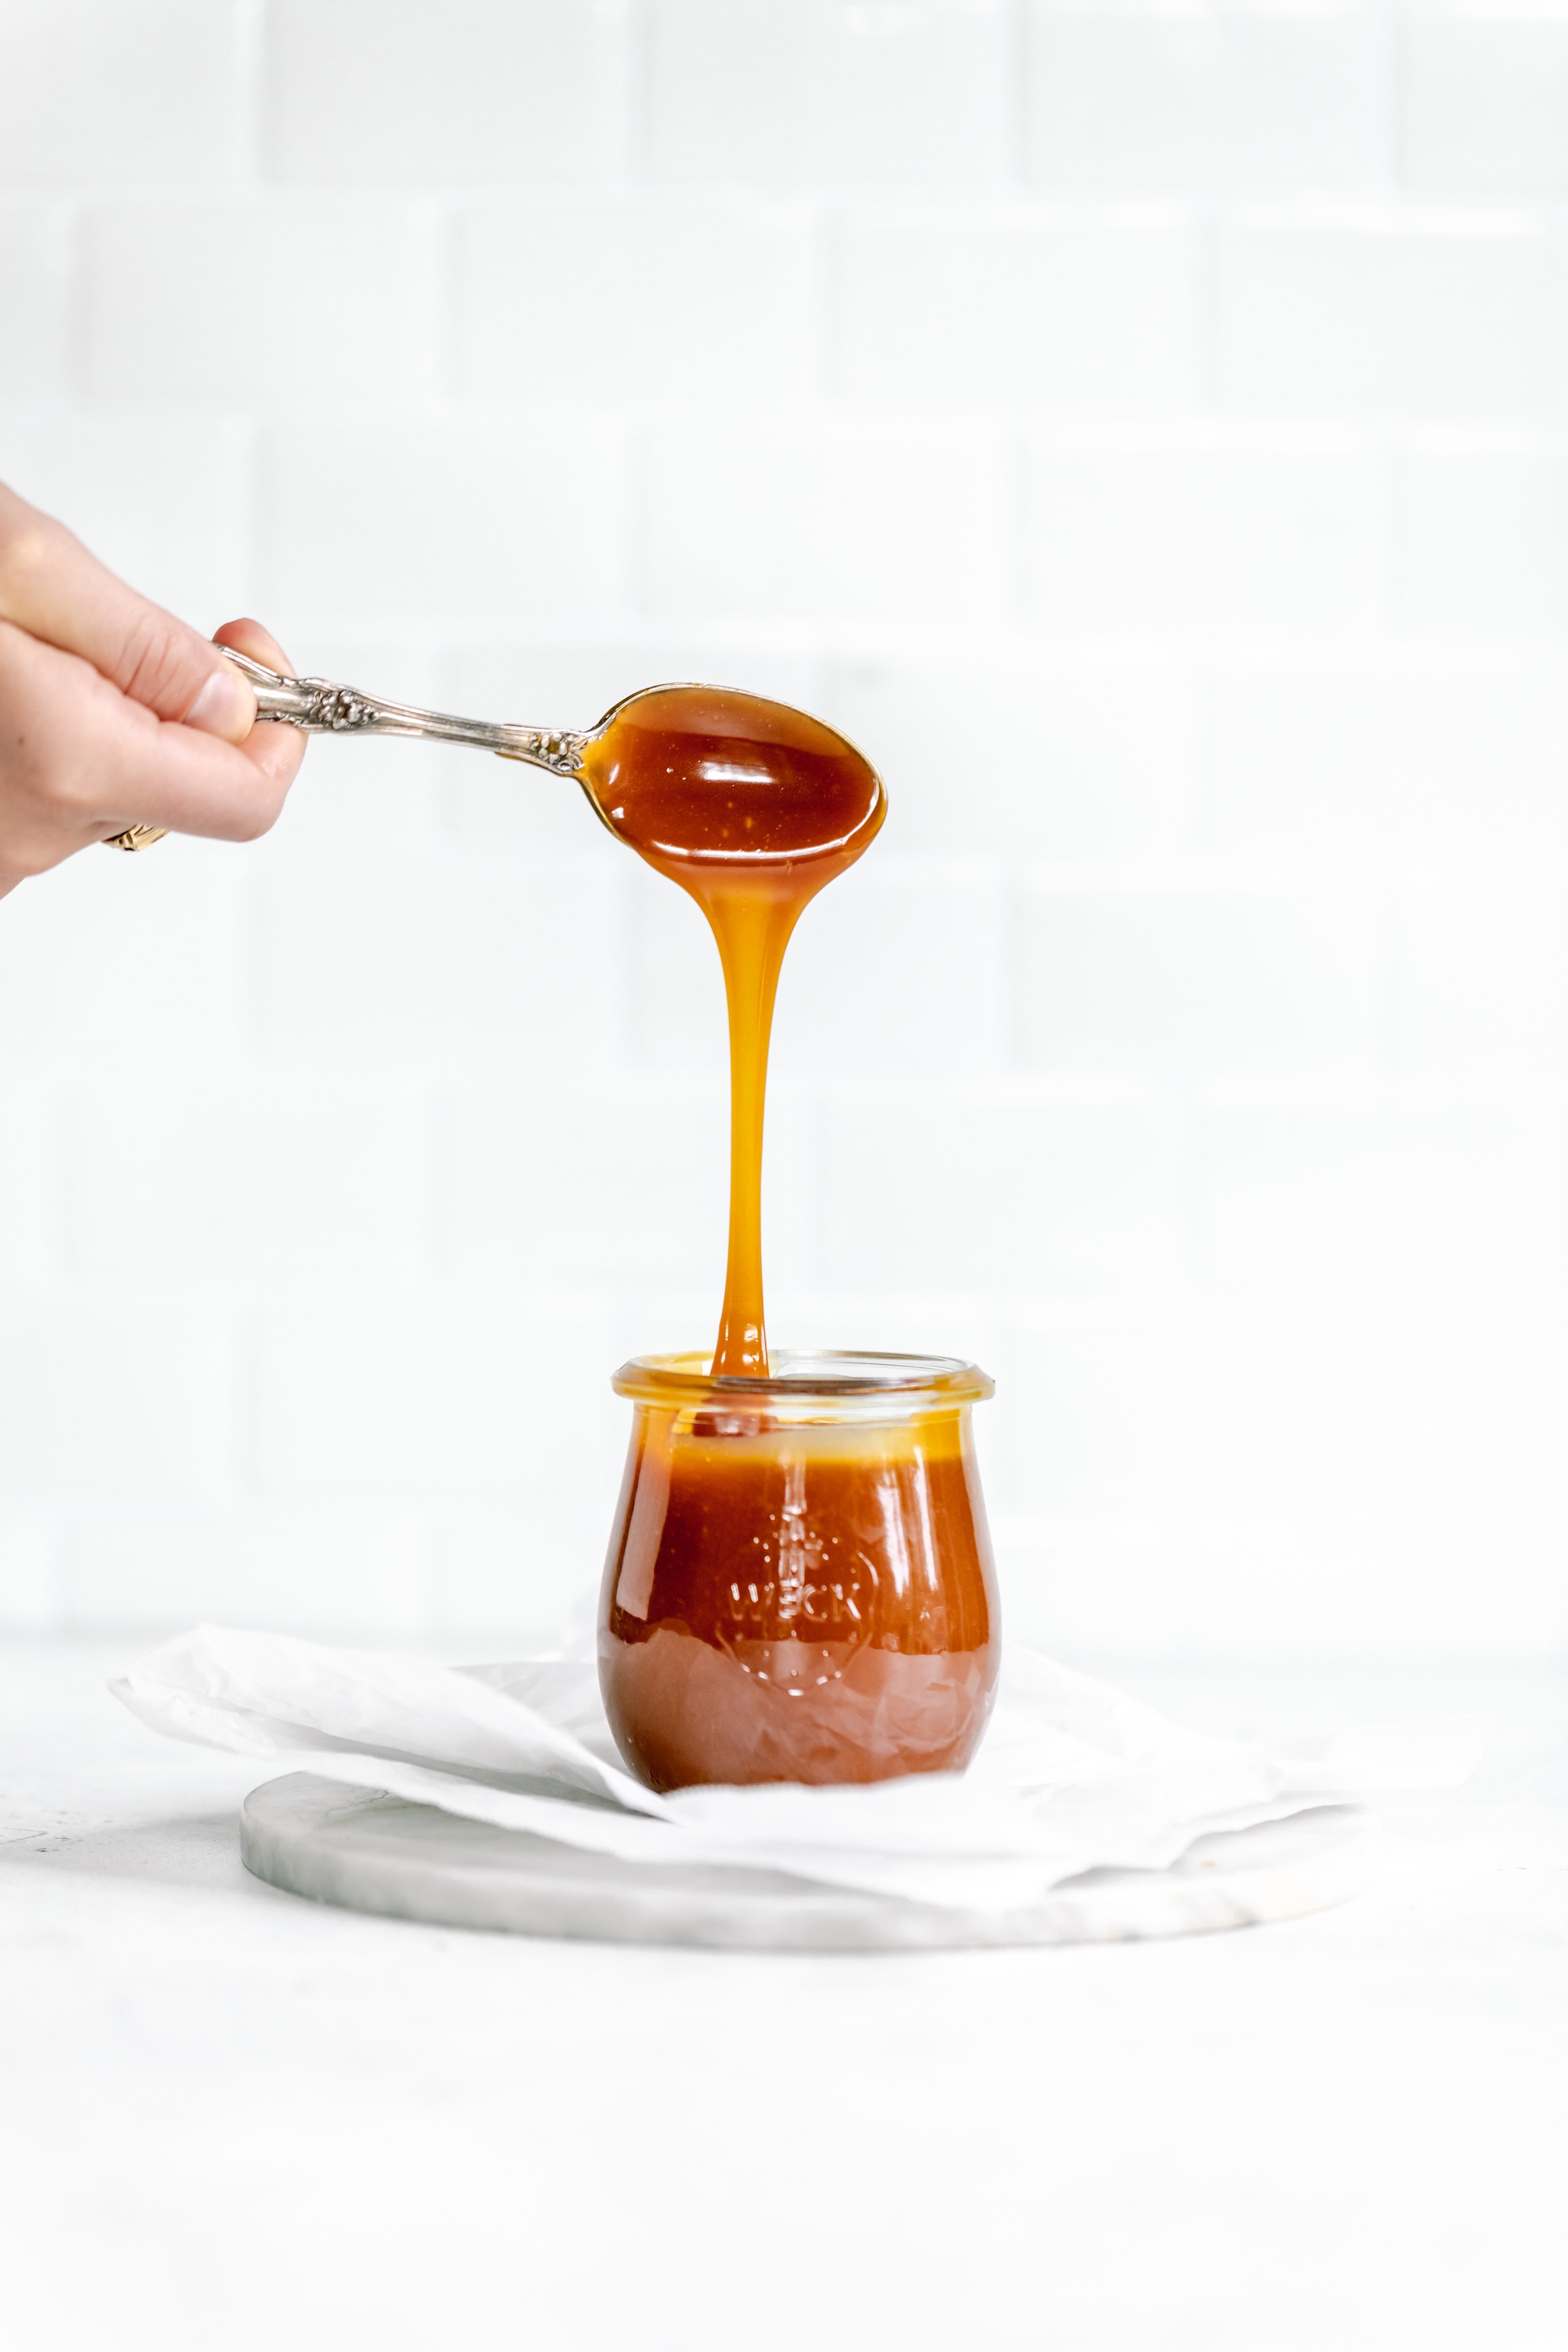 salted caramel dripping into jar off of spoon